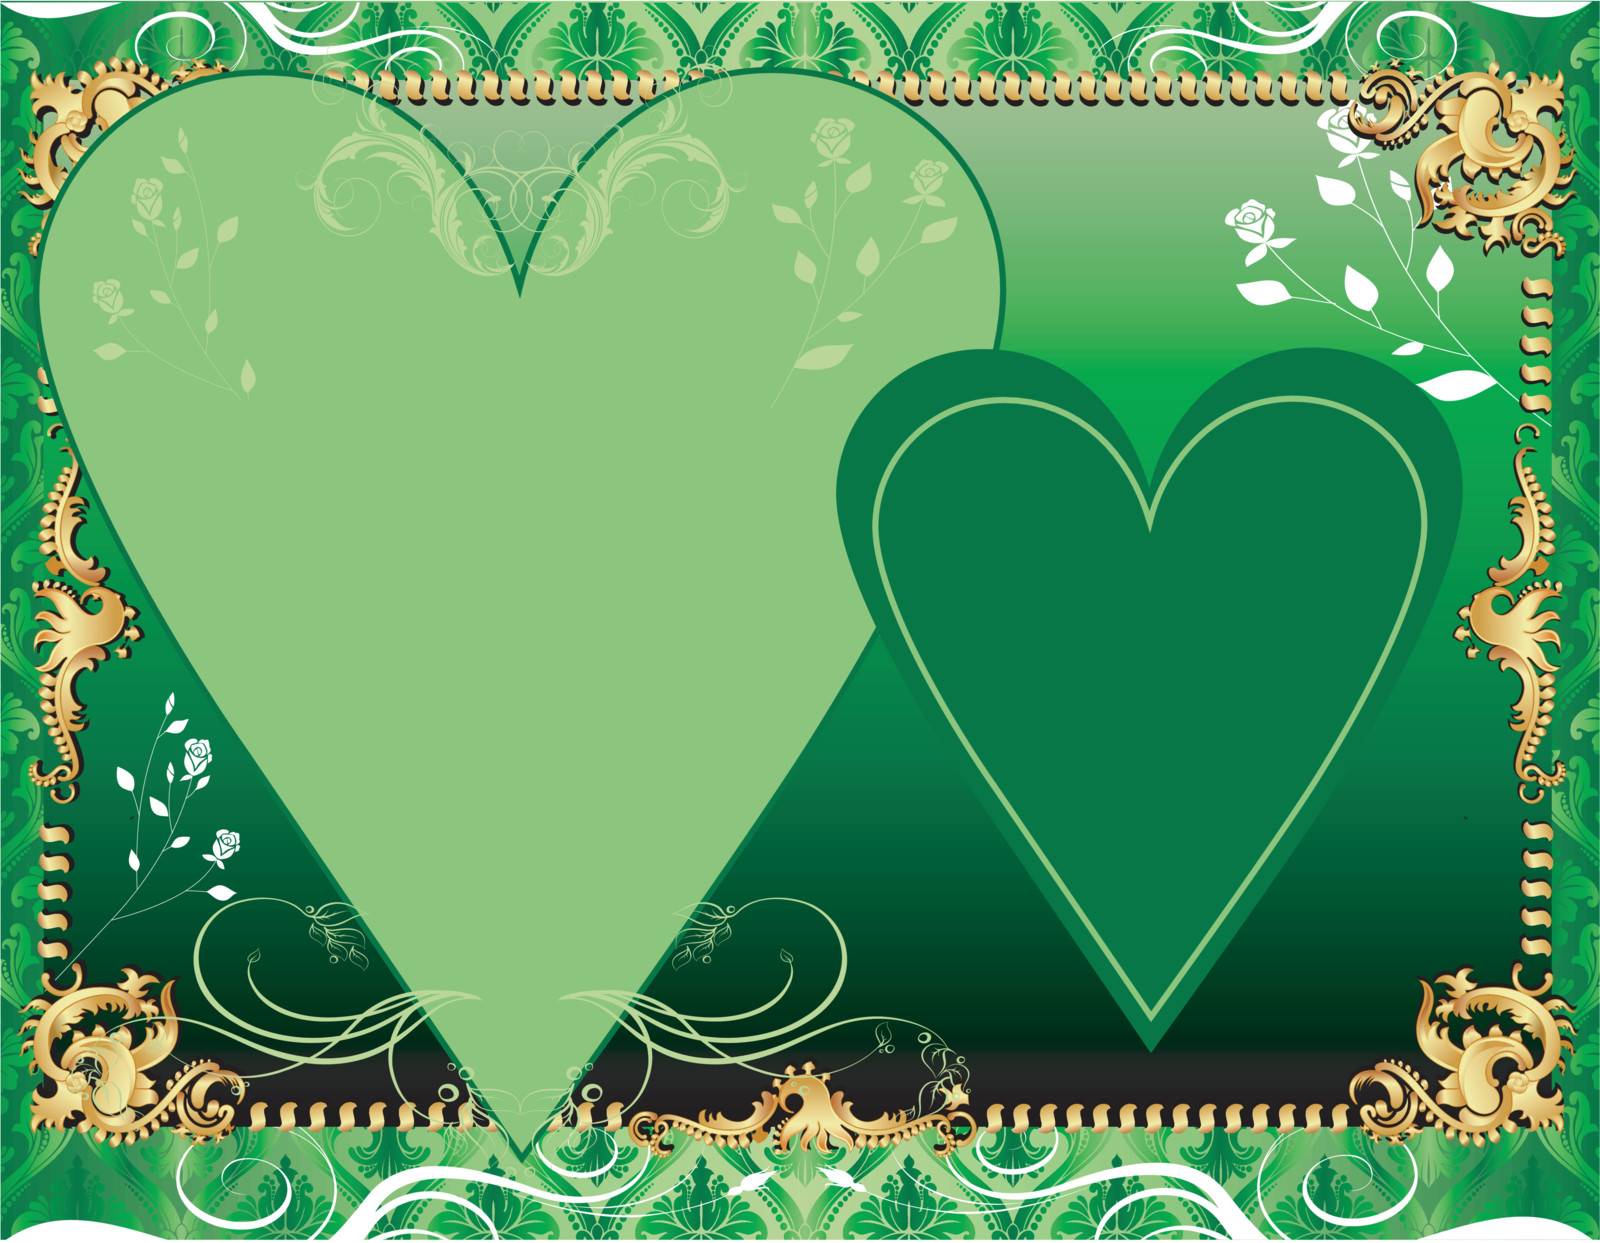 Vector Illustration. A template background for greeting card or invitation. May add photo and/or text.